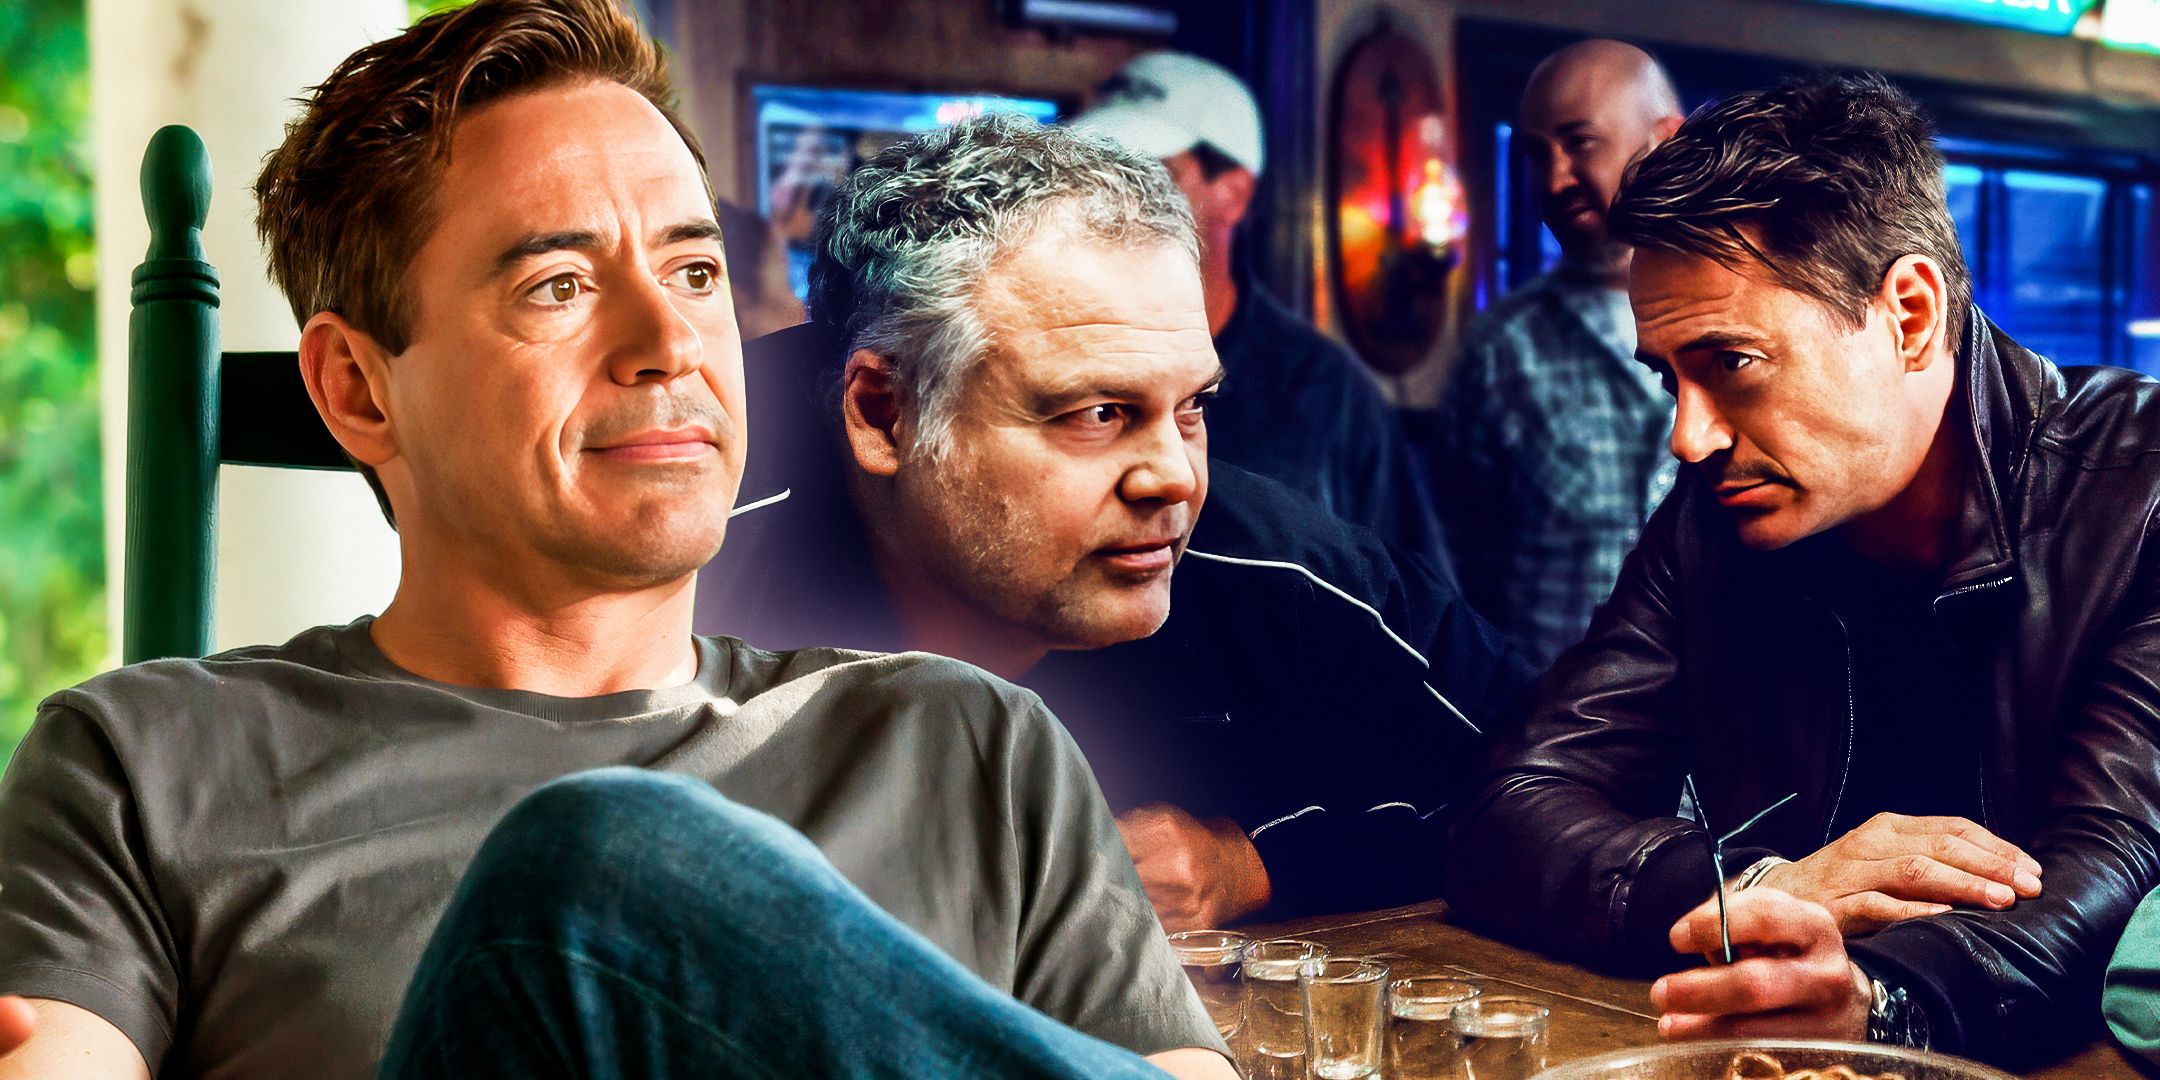 Robert Downey Jr. as Hank Palmer and Vincent D'Onofrio as Glen Palmer sitting together at a bar in The Judge (2014)